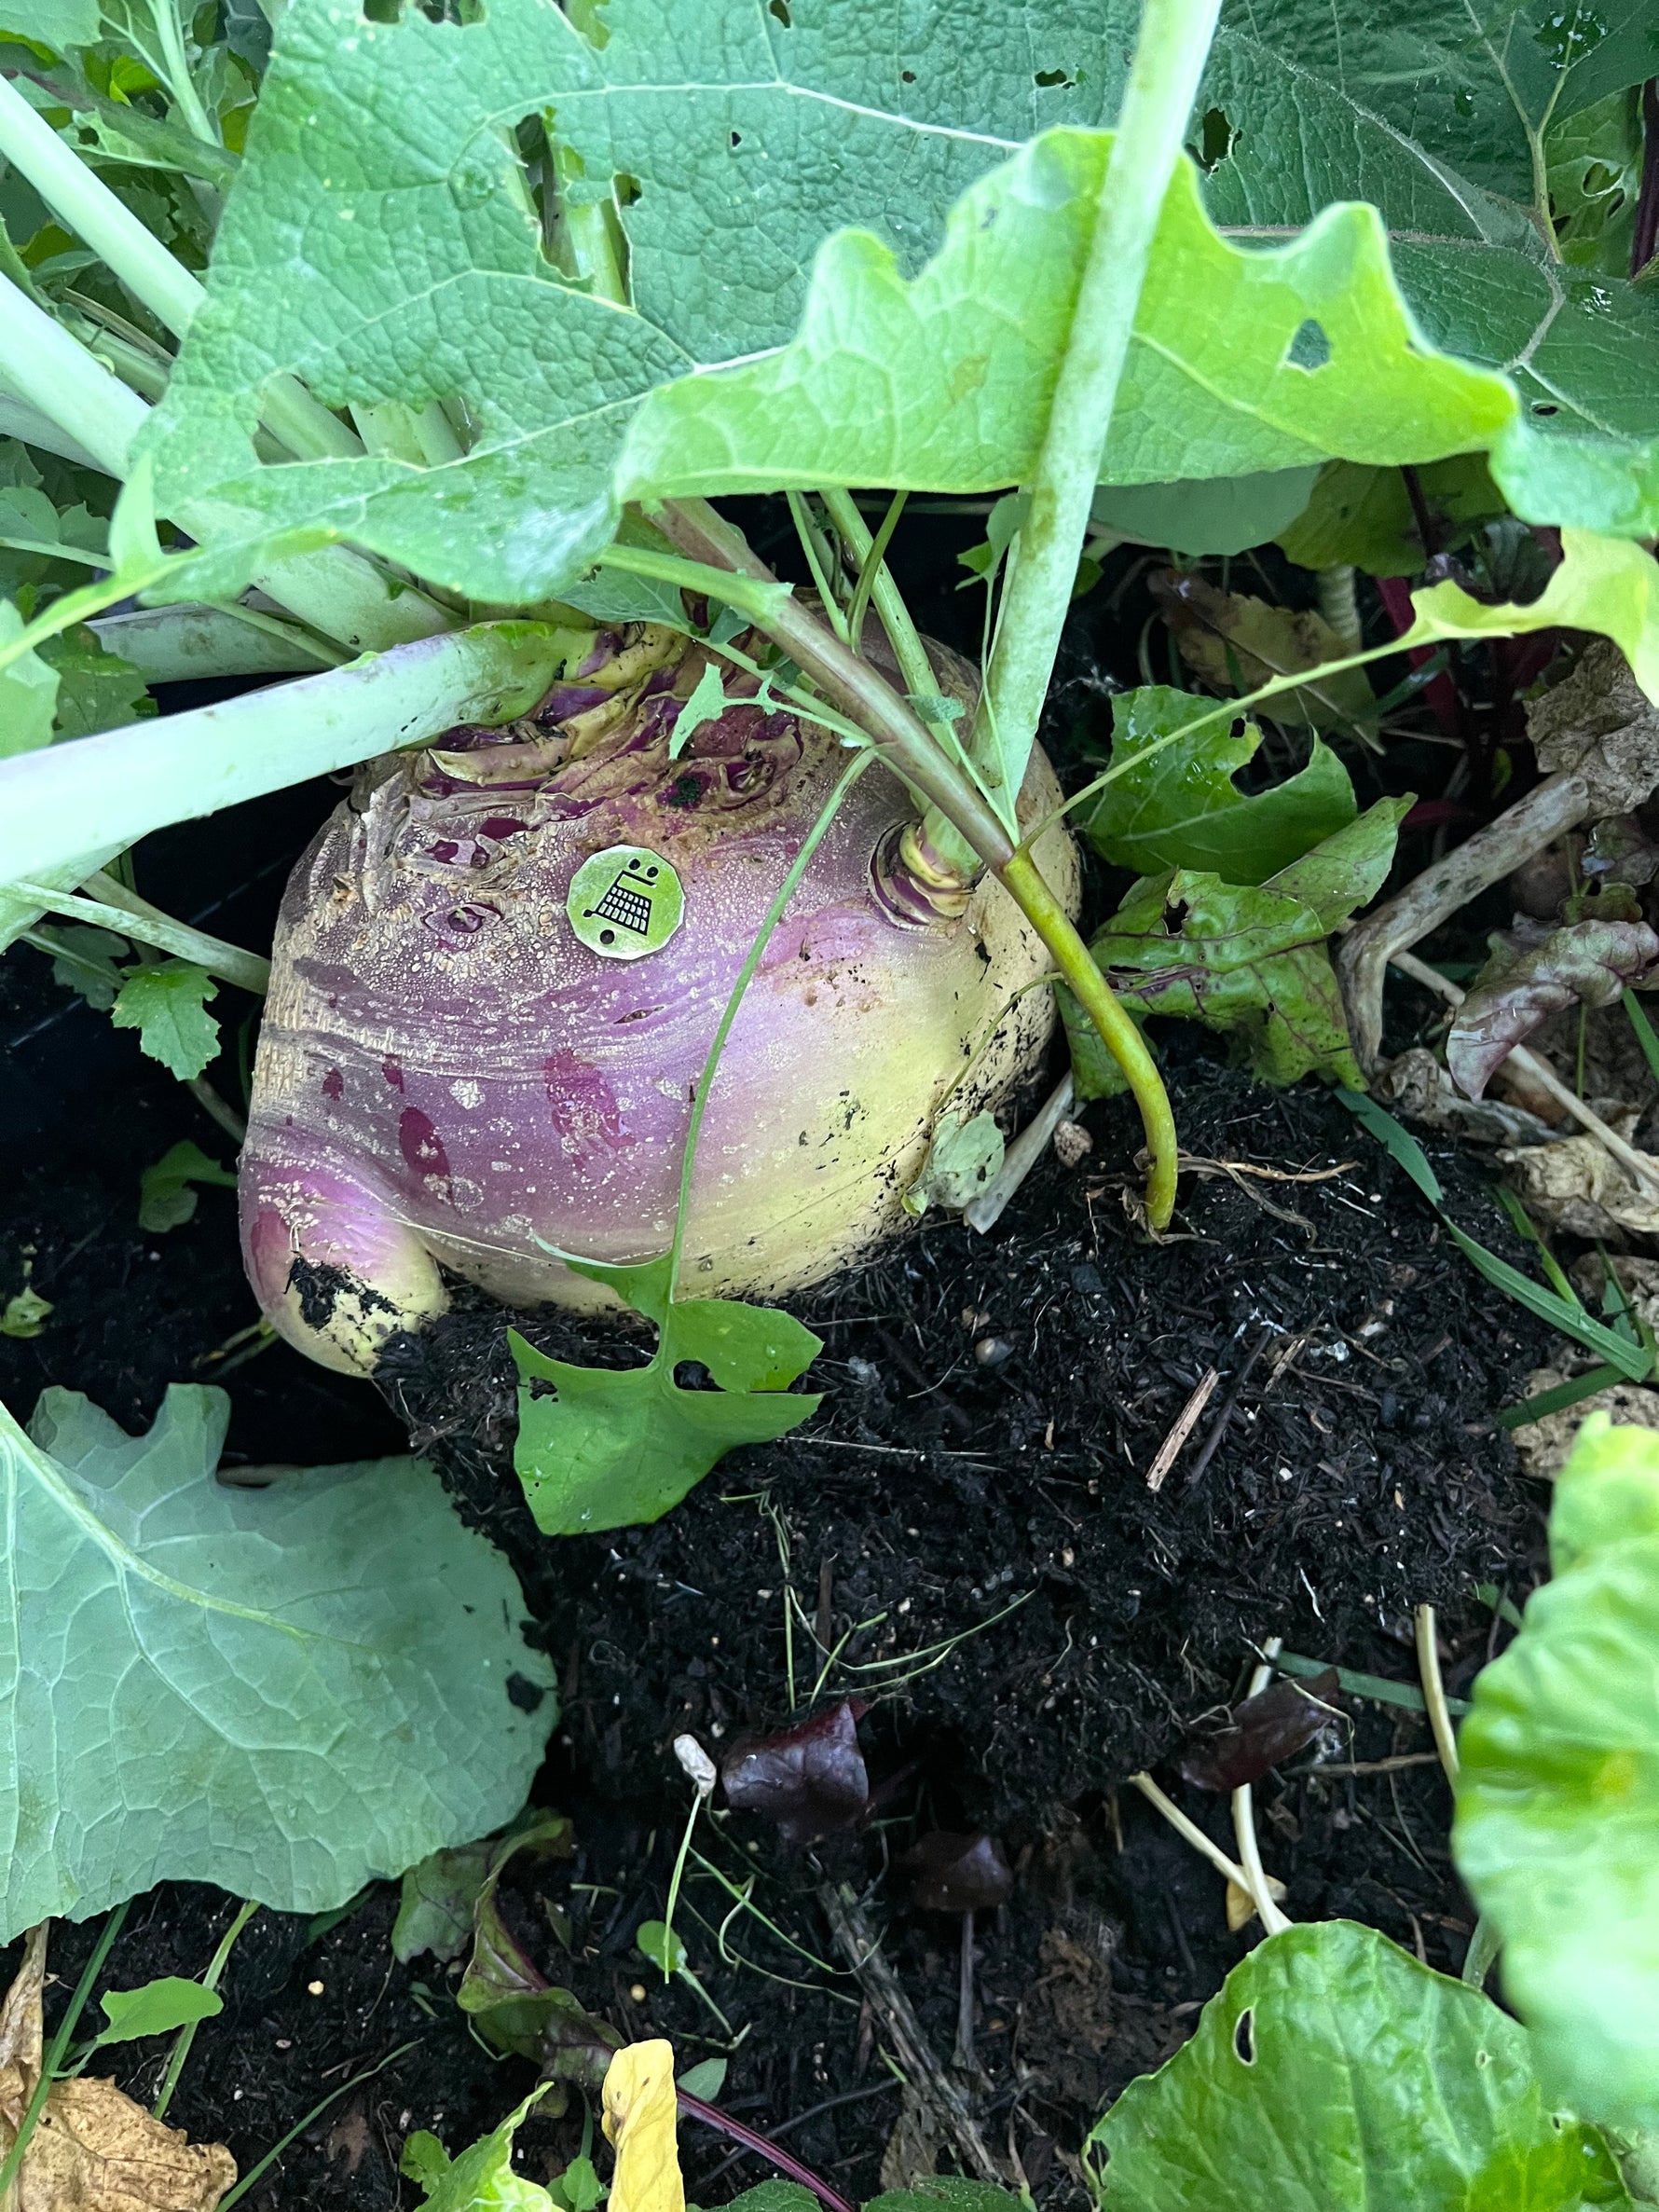 September Sowing; Turnips